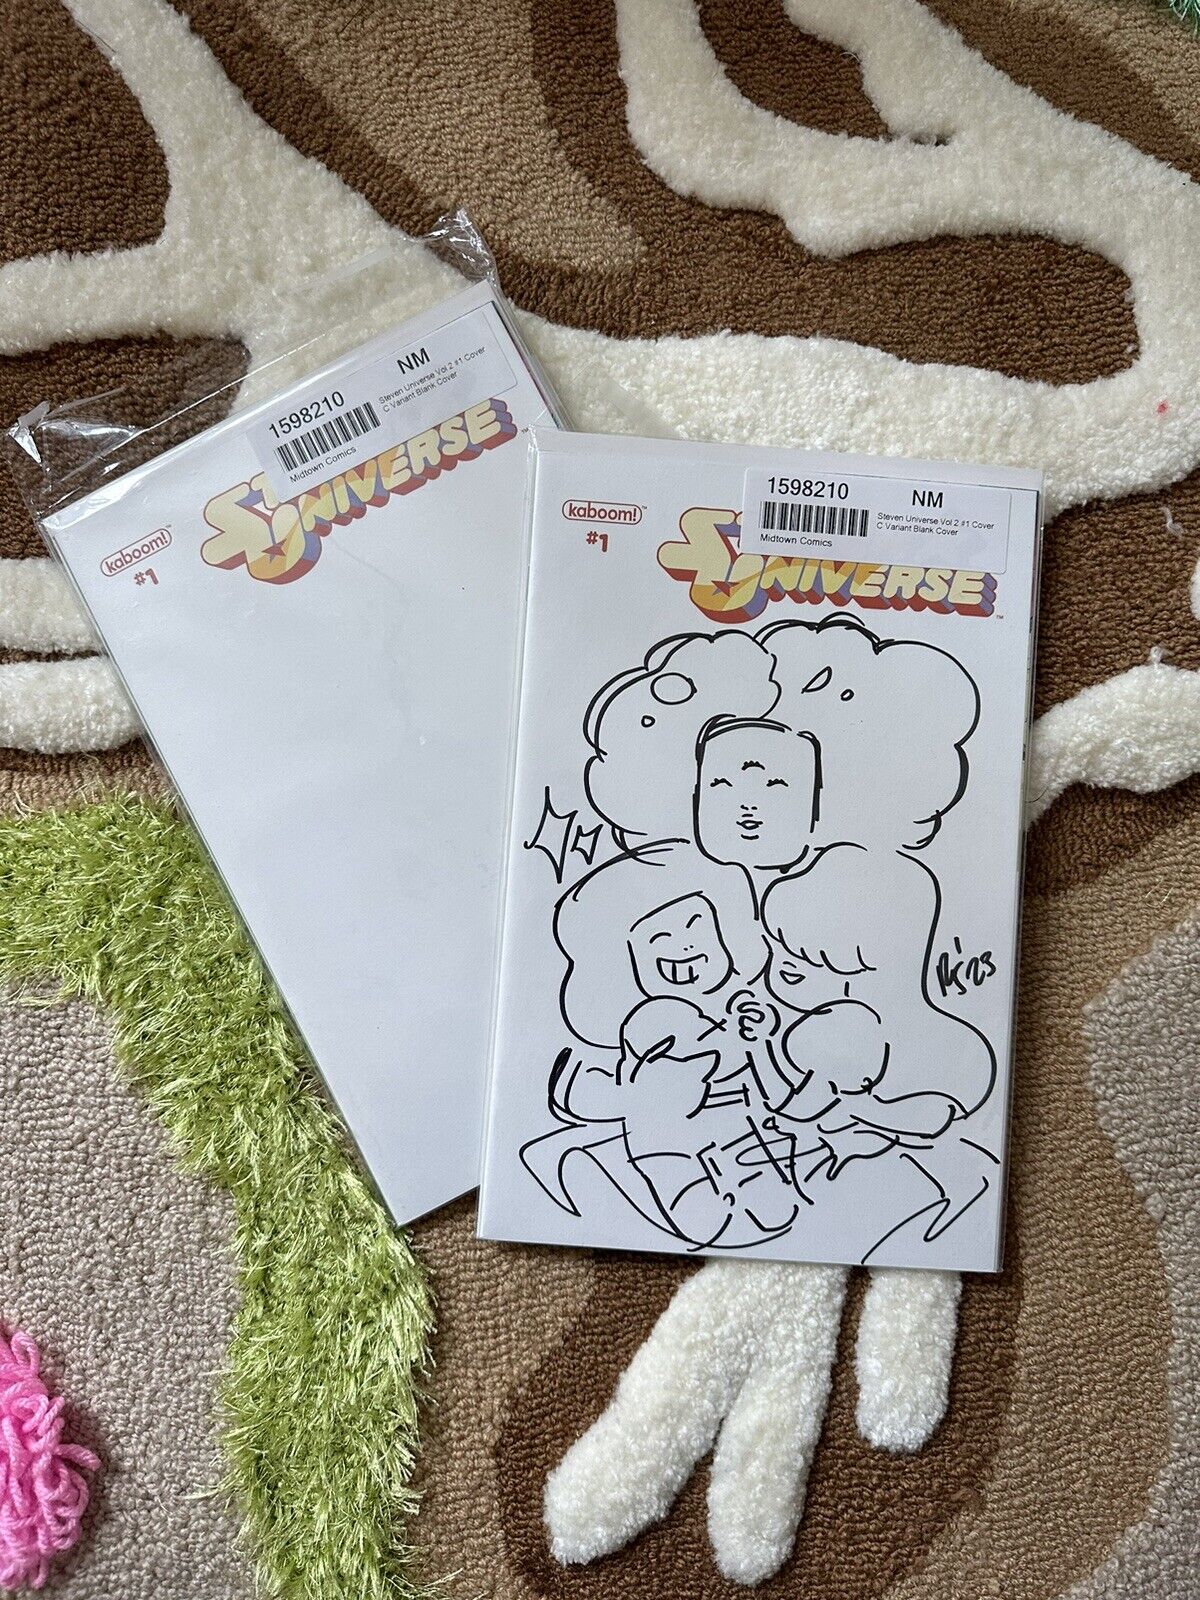 Steven Universe Signed And Drawn by Rebecca Sugar Kaboom Comic Blank